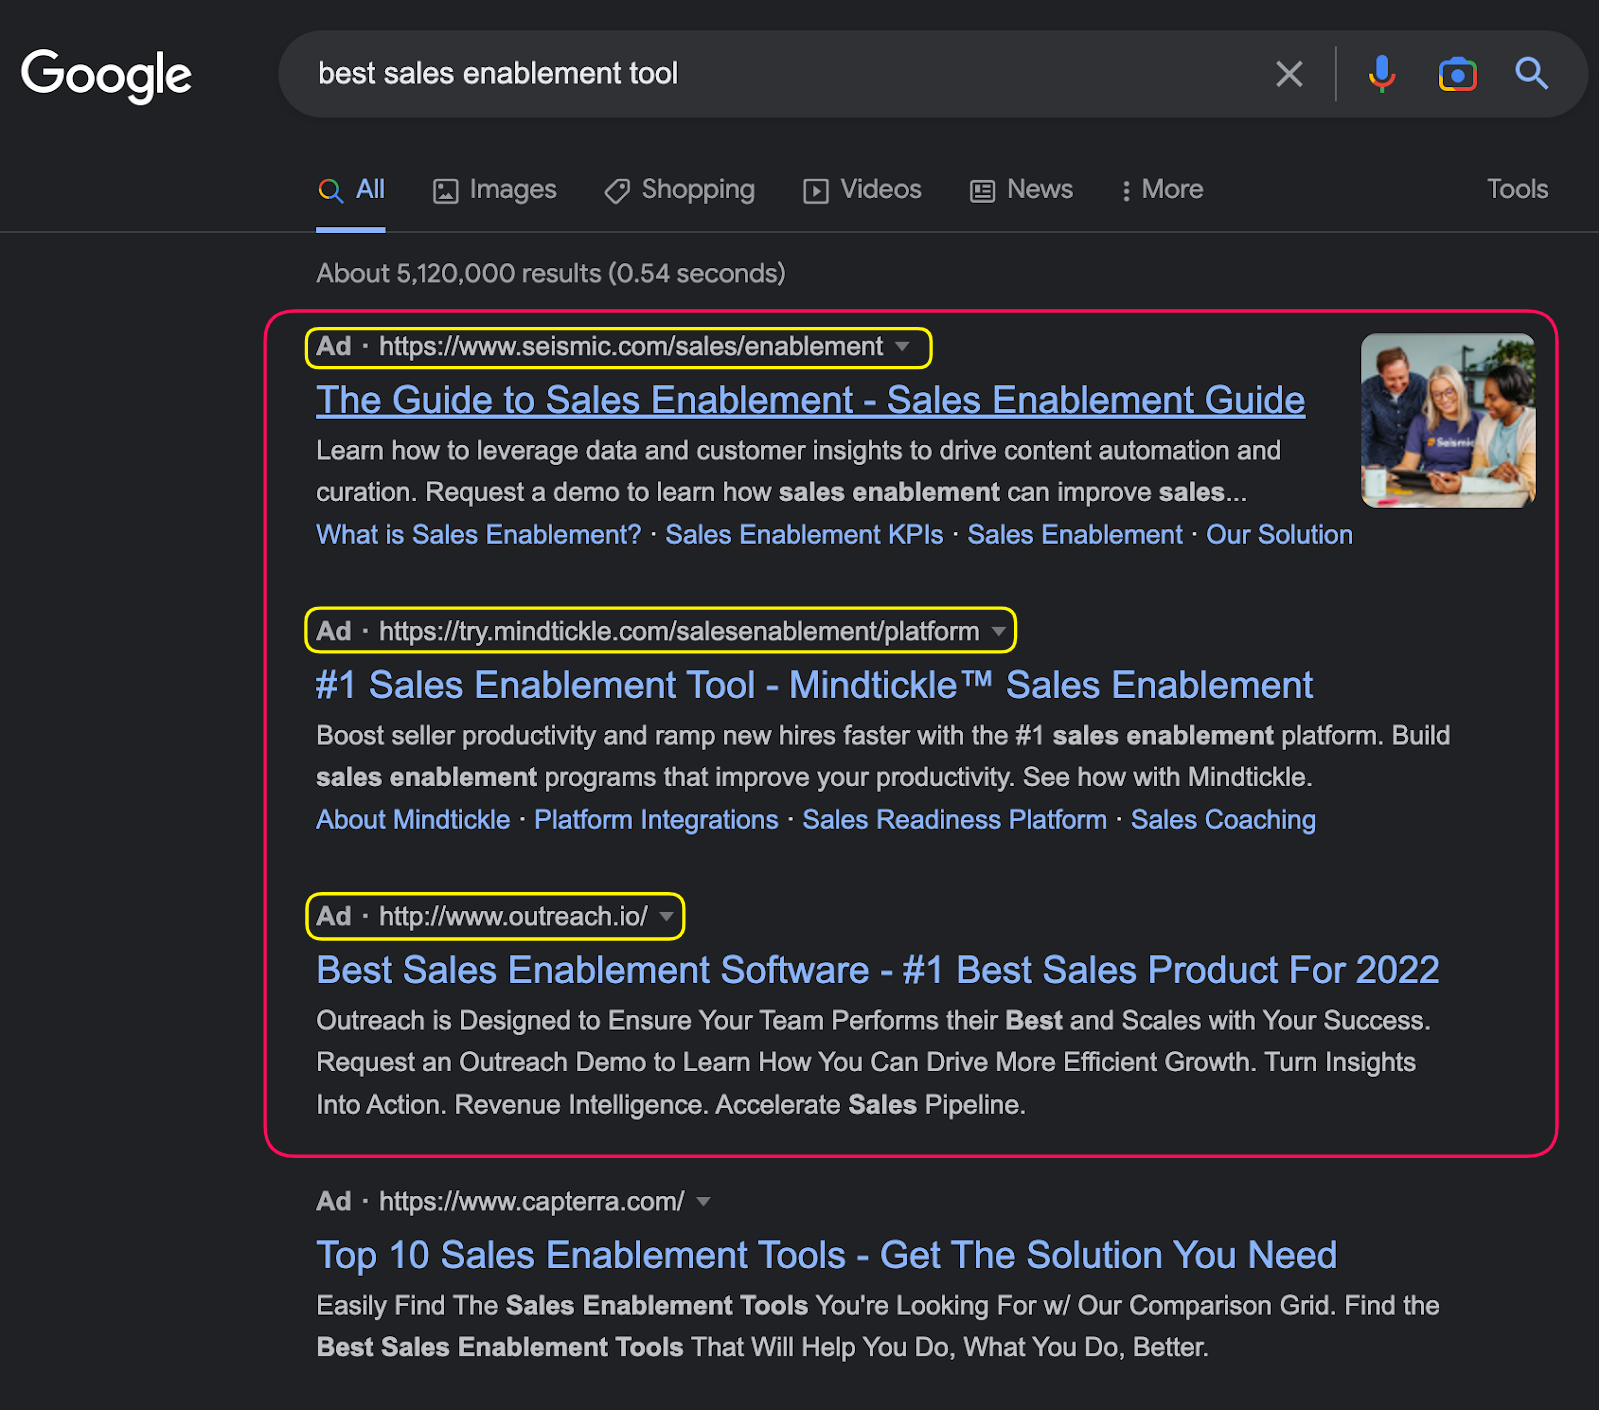 screenshot of google search results page for the term "best sales enablement tools" with the first three results highlighted